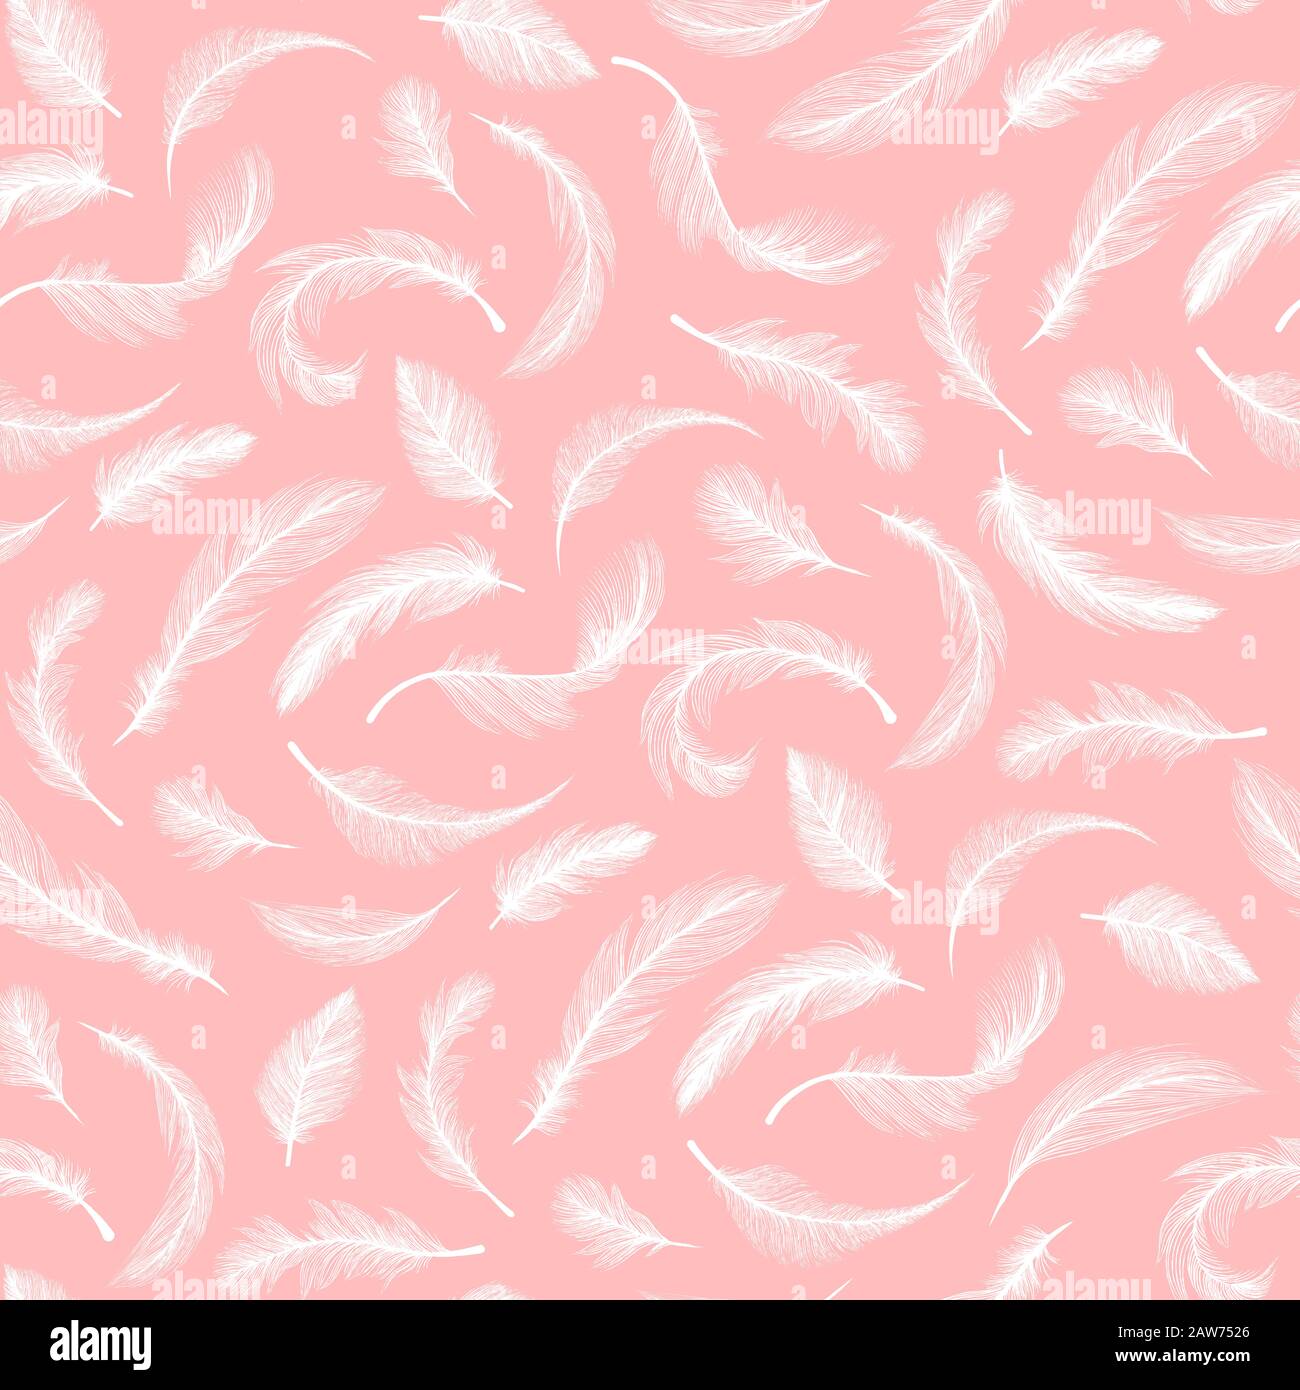 Feathers pattern on pink background, vector seamless decoration and ornate textile design. Abstract different shape flying white fluffy feather with down fluff plume texture, wallpaper ornament Stock Vector